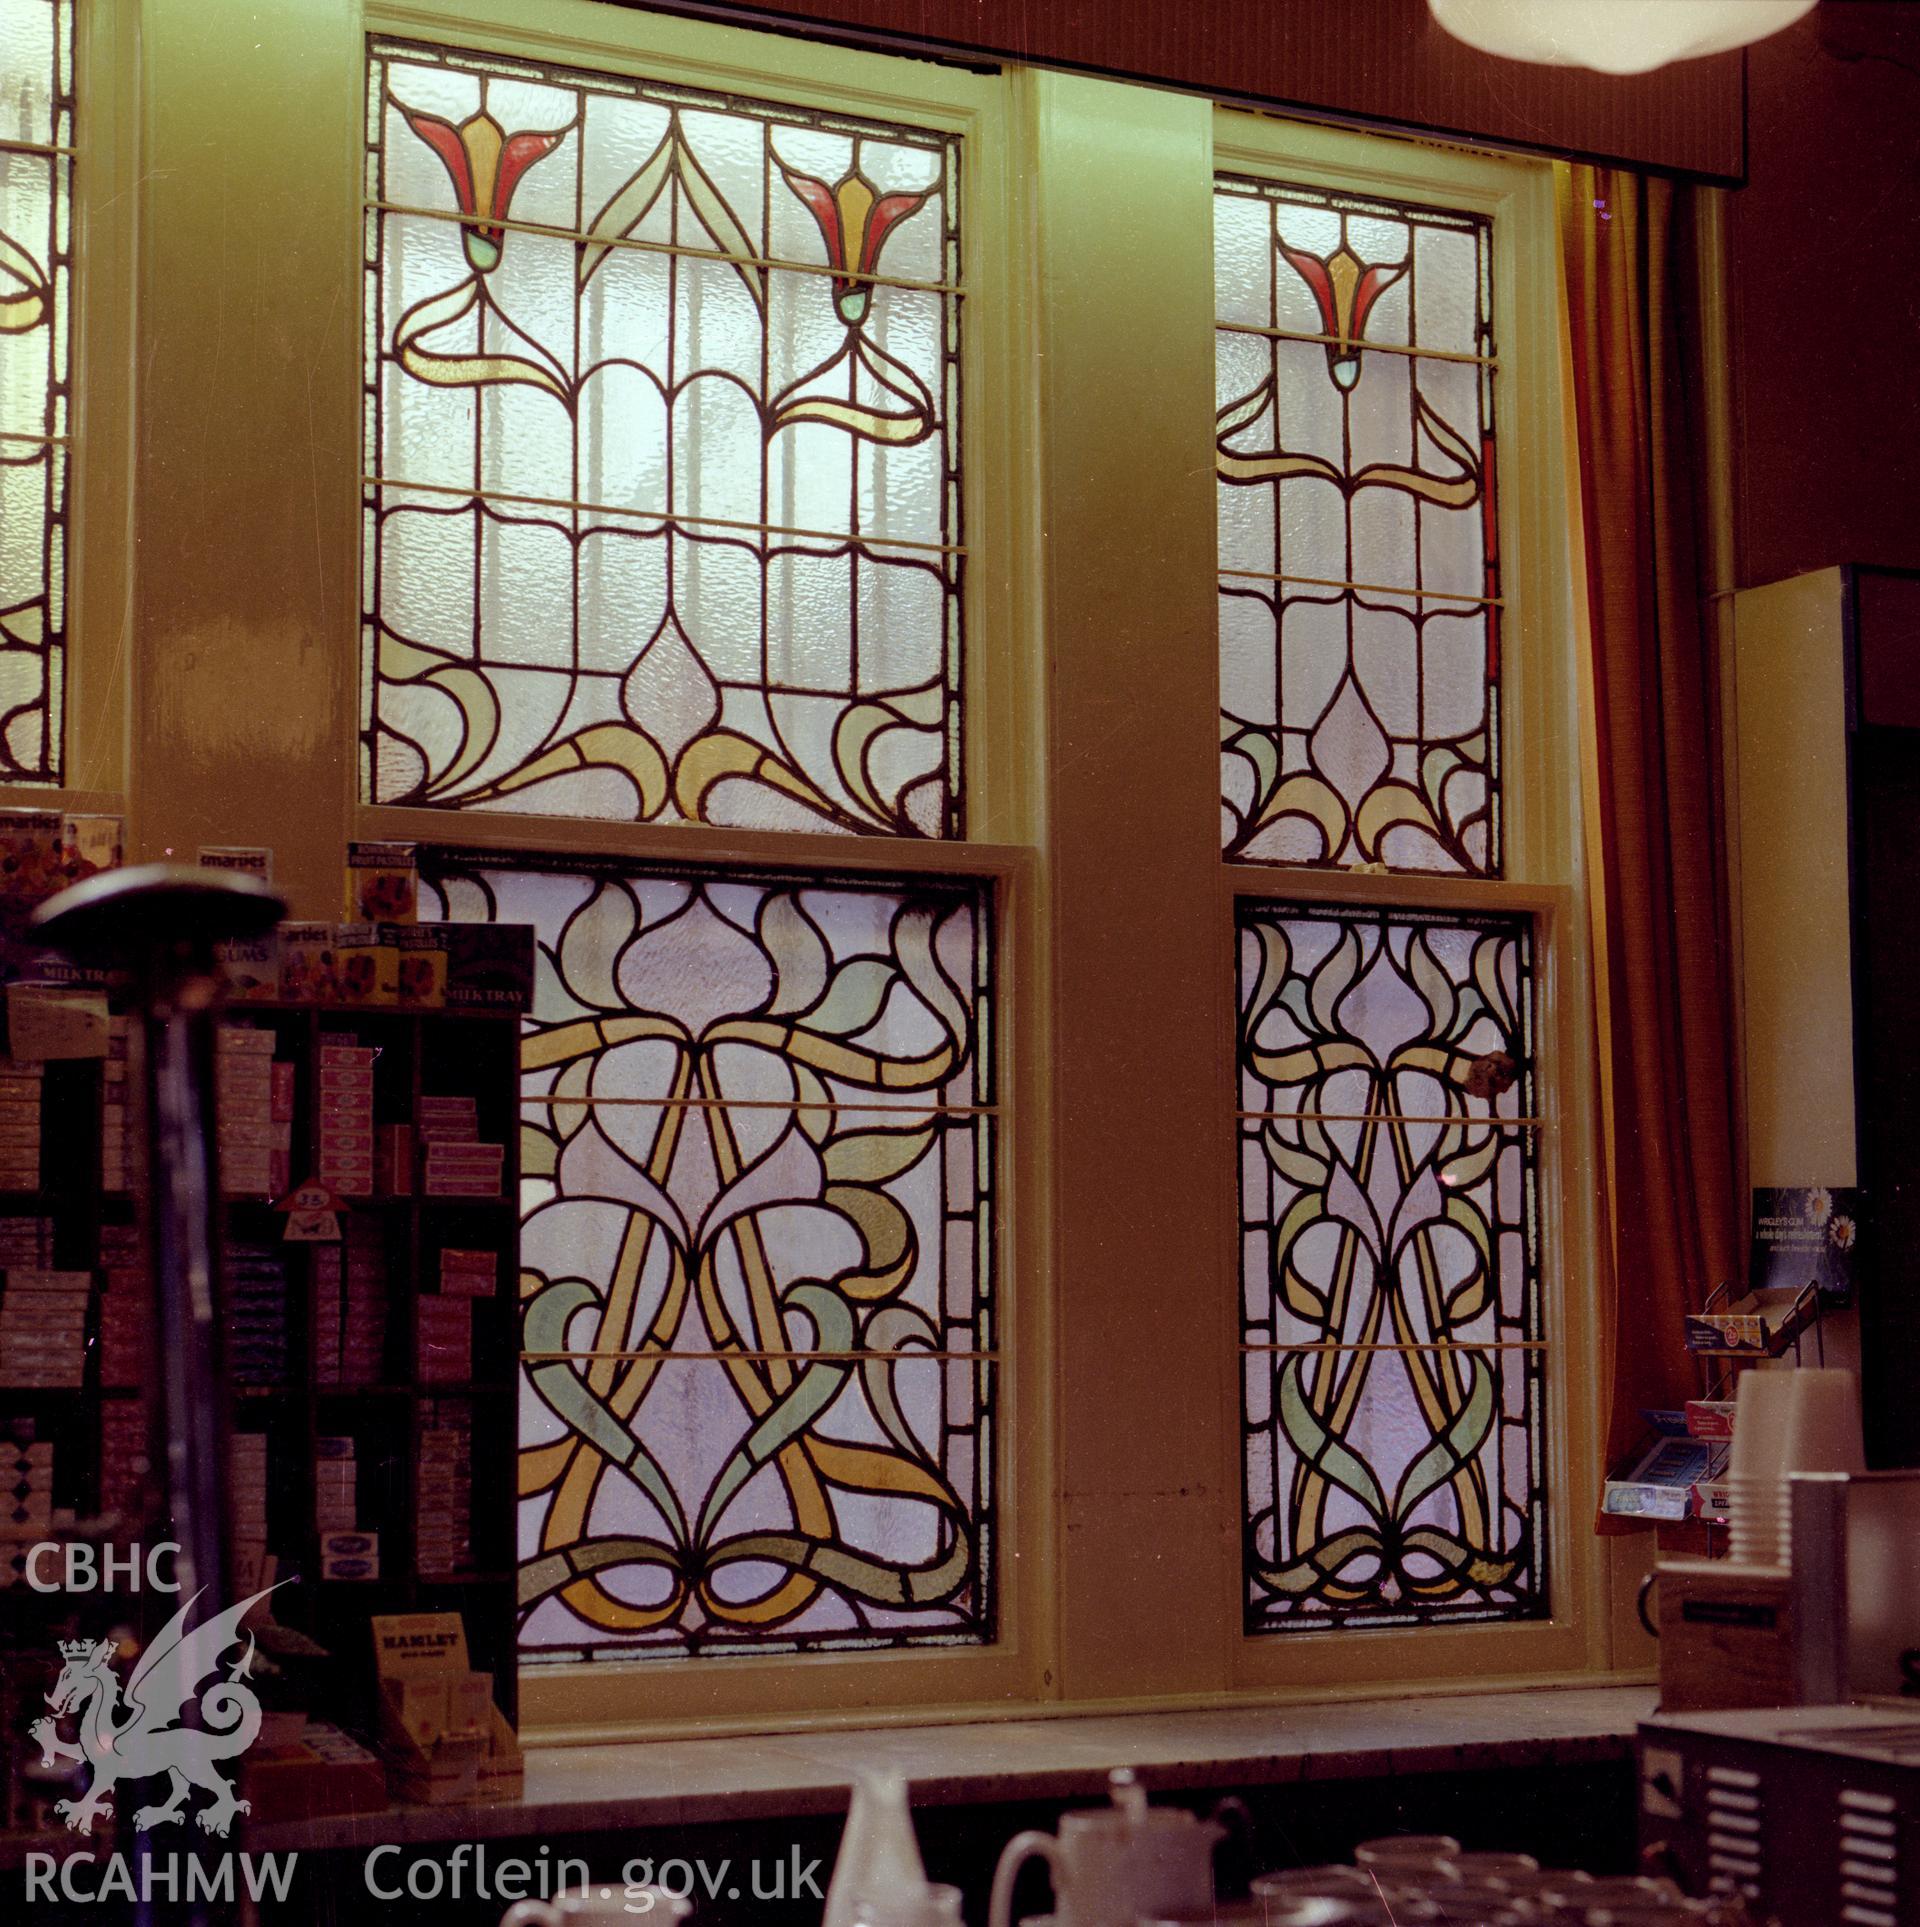 Digital copy of a colour negative showing stained glass window at Neath Railway Station, taken by RCAHMW.